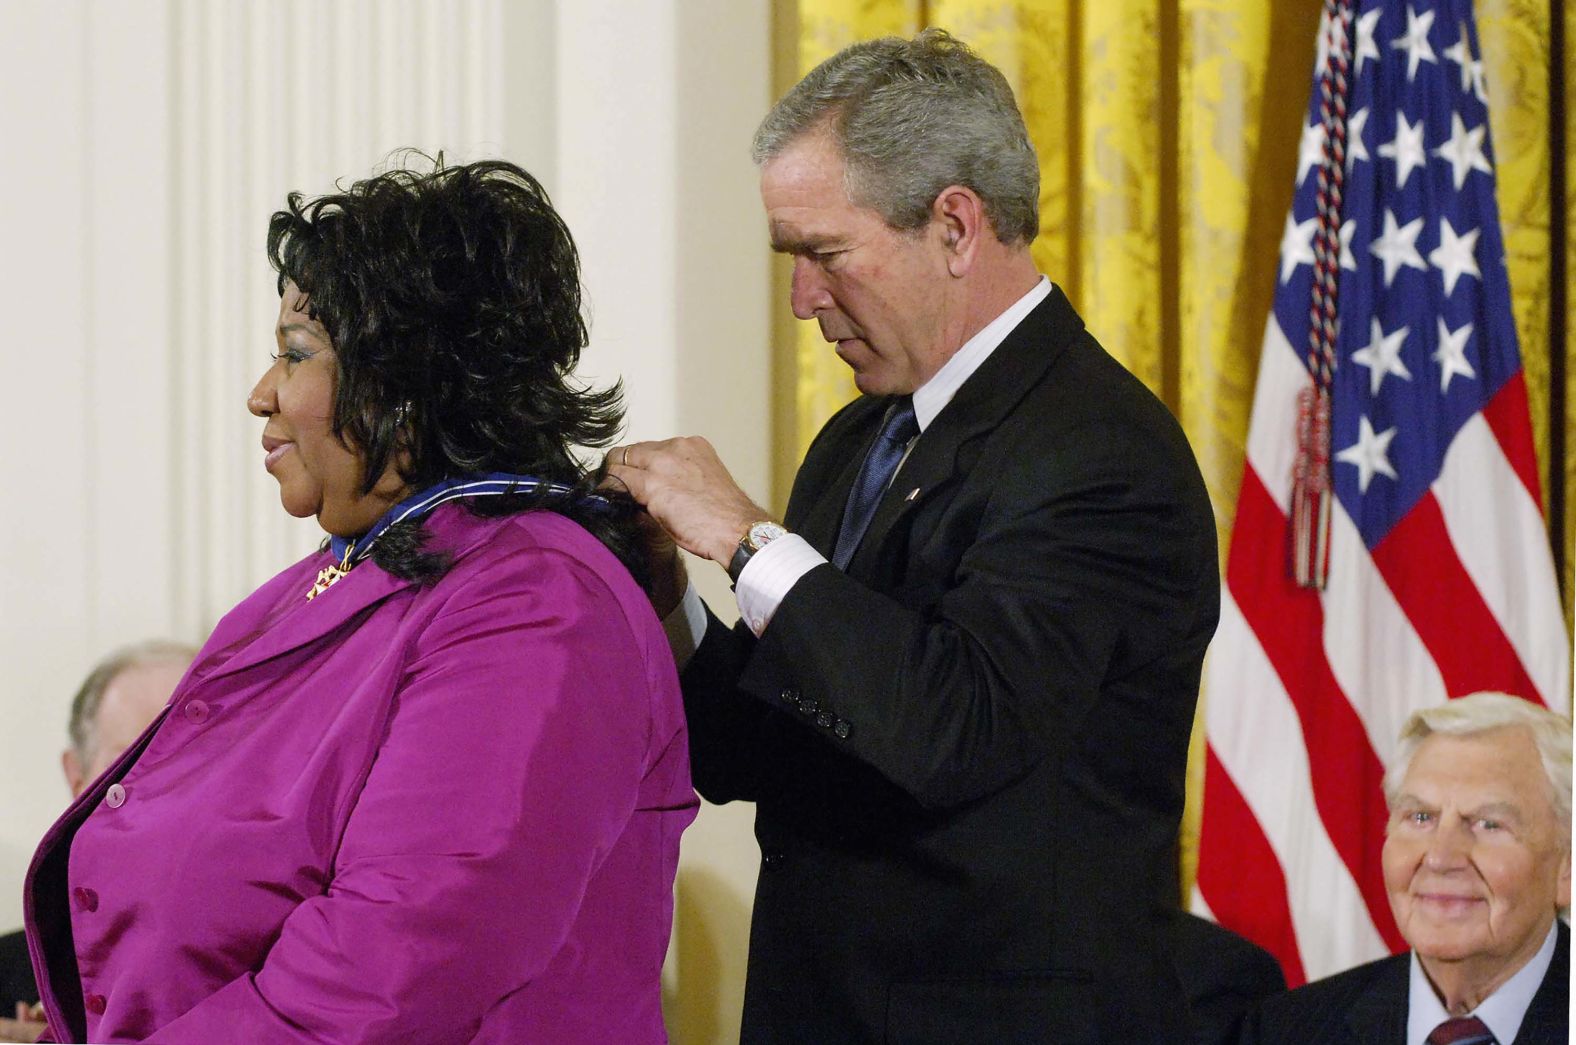 Former President George W. Bush presented Franklin with the Presidential Medal of Freedom, the nation's highest civilian honor, in 2005. The medal is awarded to those who have made contributions to national security, world peace or culture. 